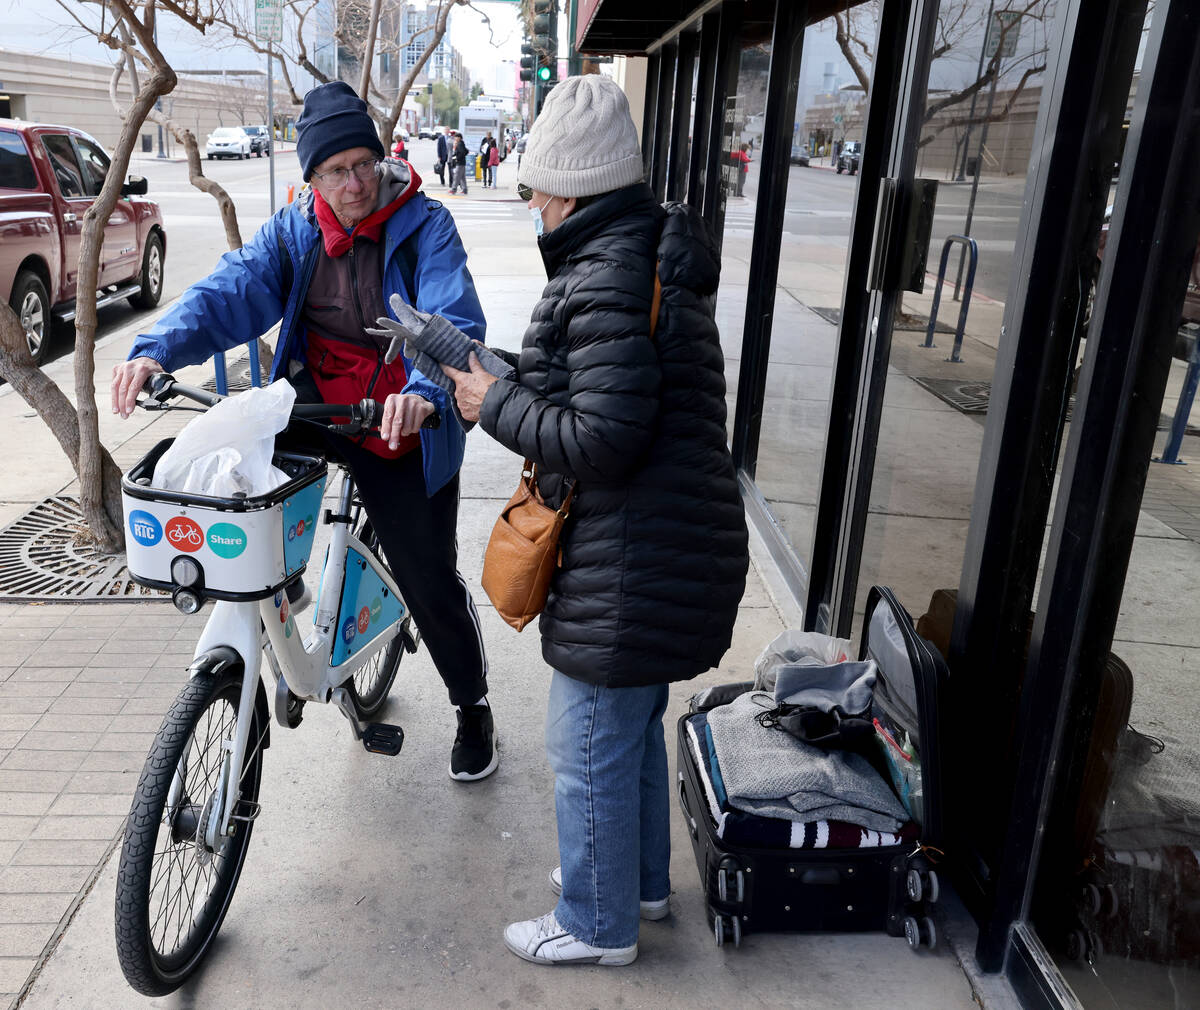 Richard Birmingham visits an unidentified woman during his daily bicycle outreach ride in downt ...